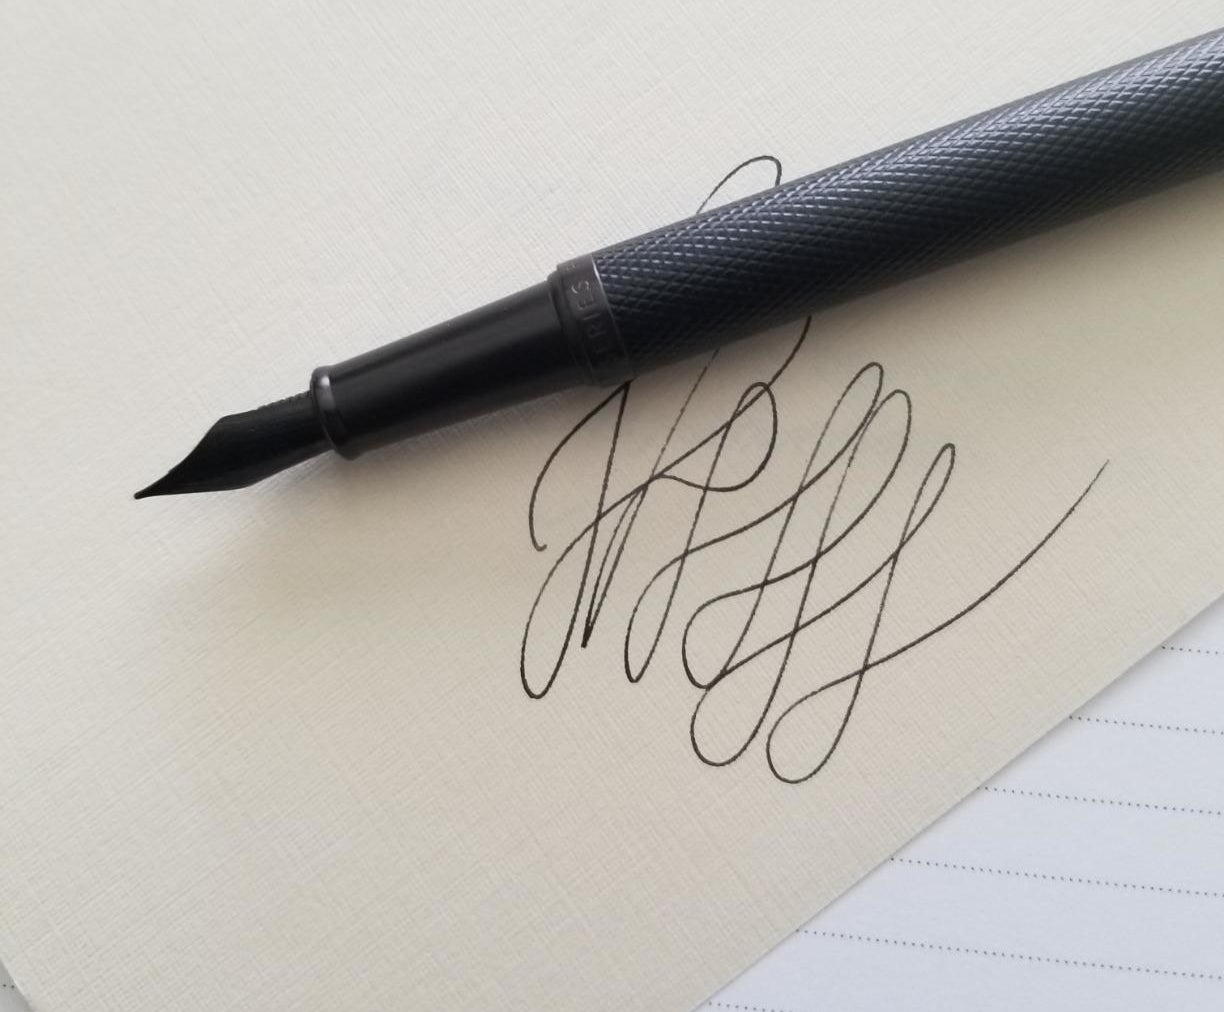 the pen with calligraphy lines underneath it